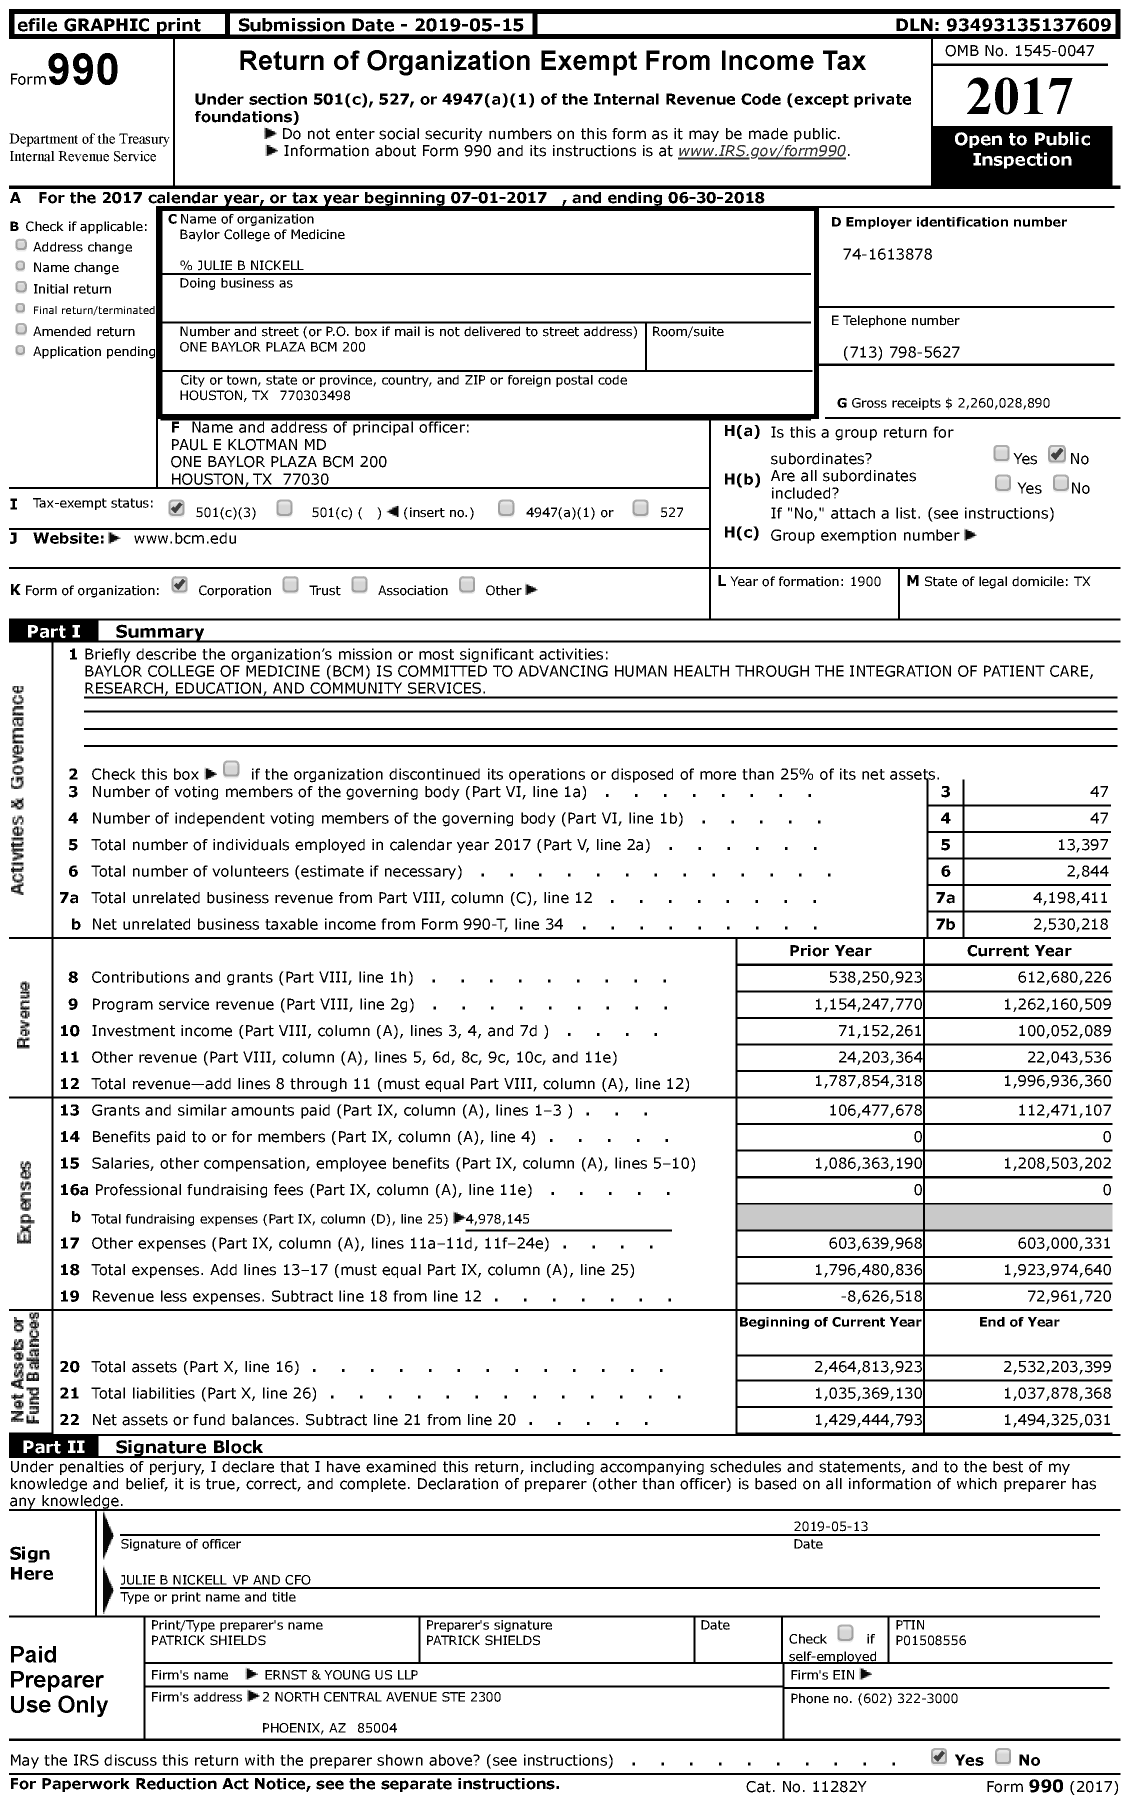 Image of first page of 2017 Form 990 for Baylor College of Medicine (BCM)